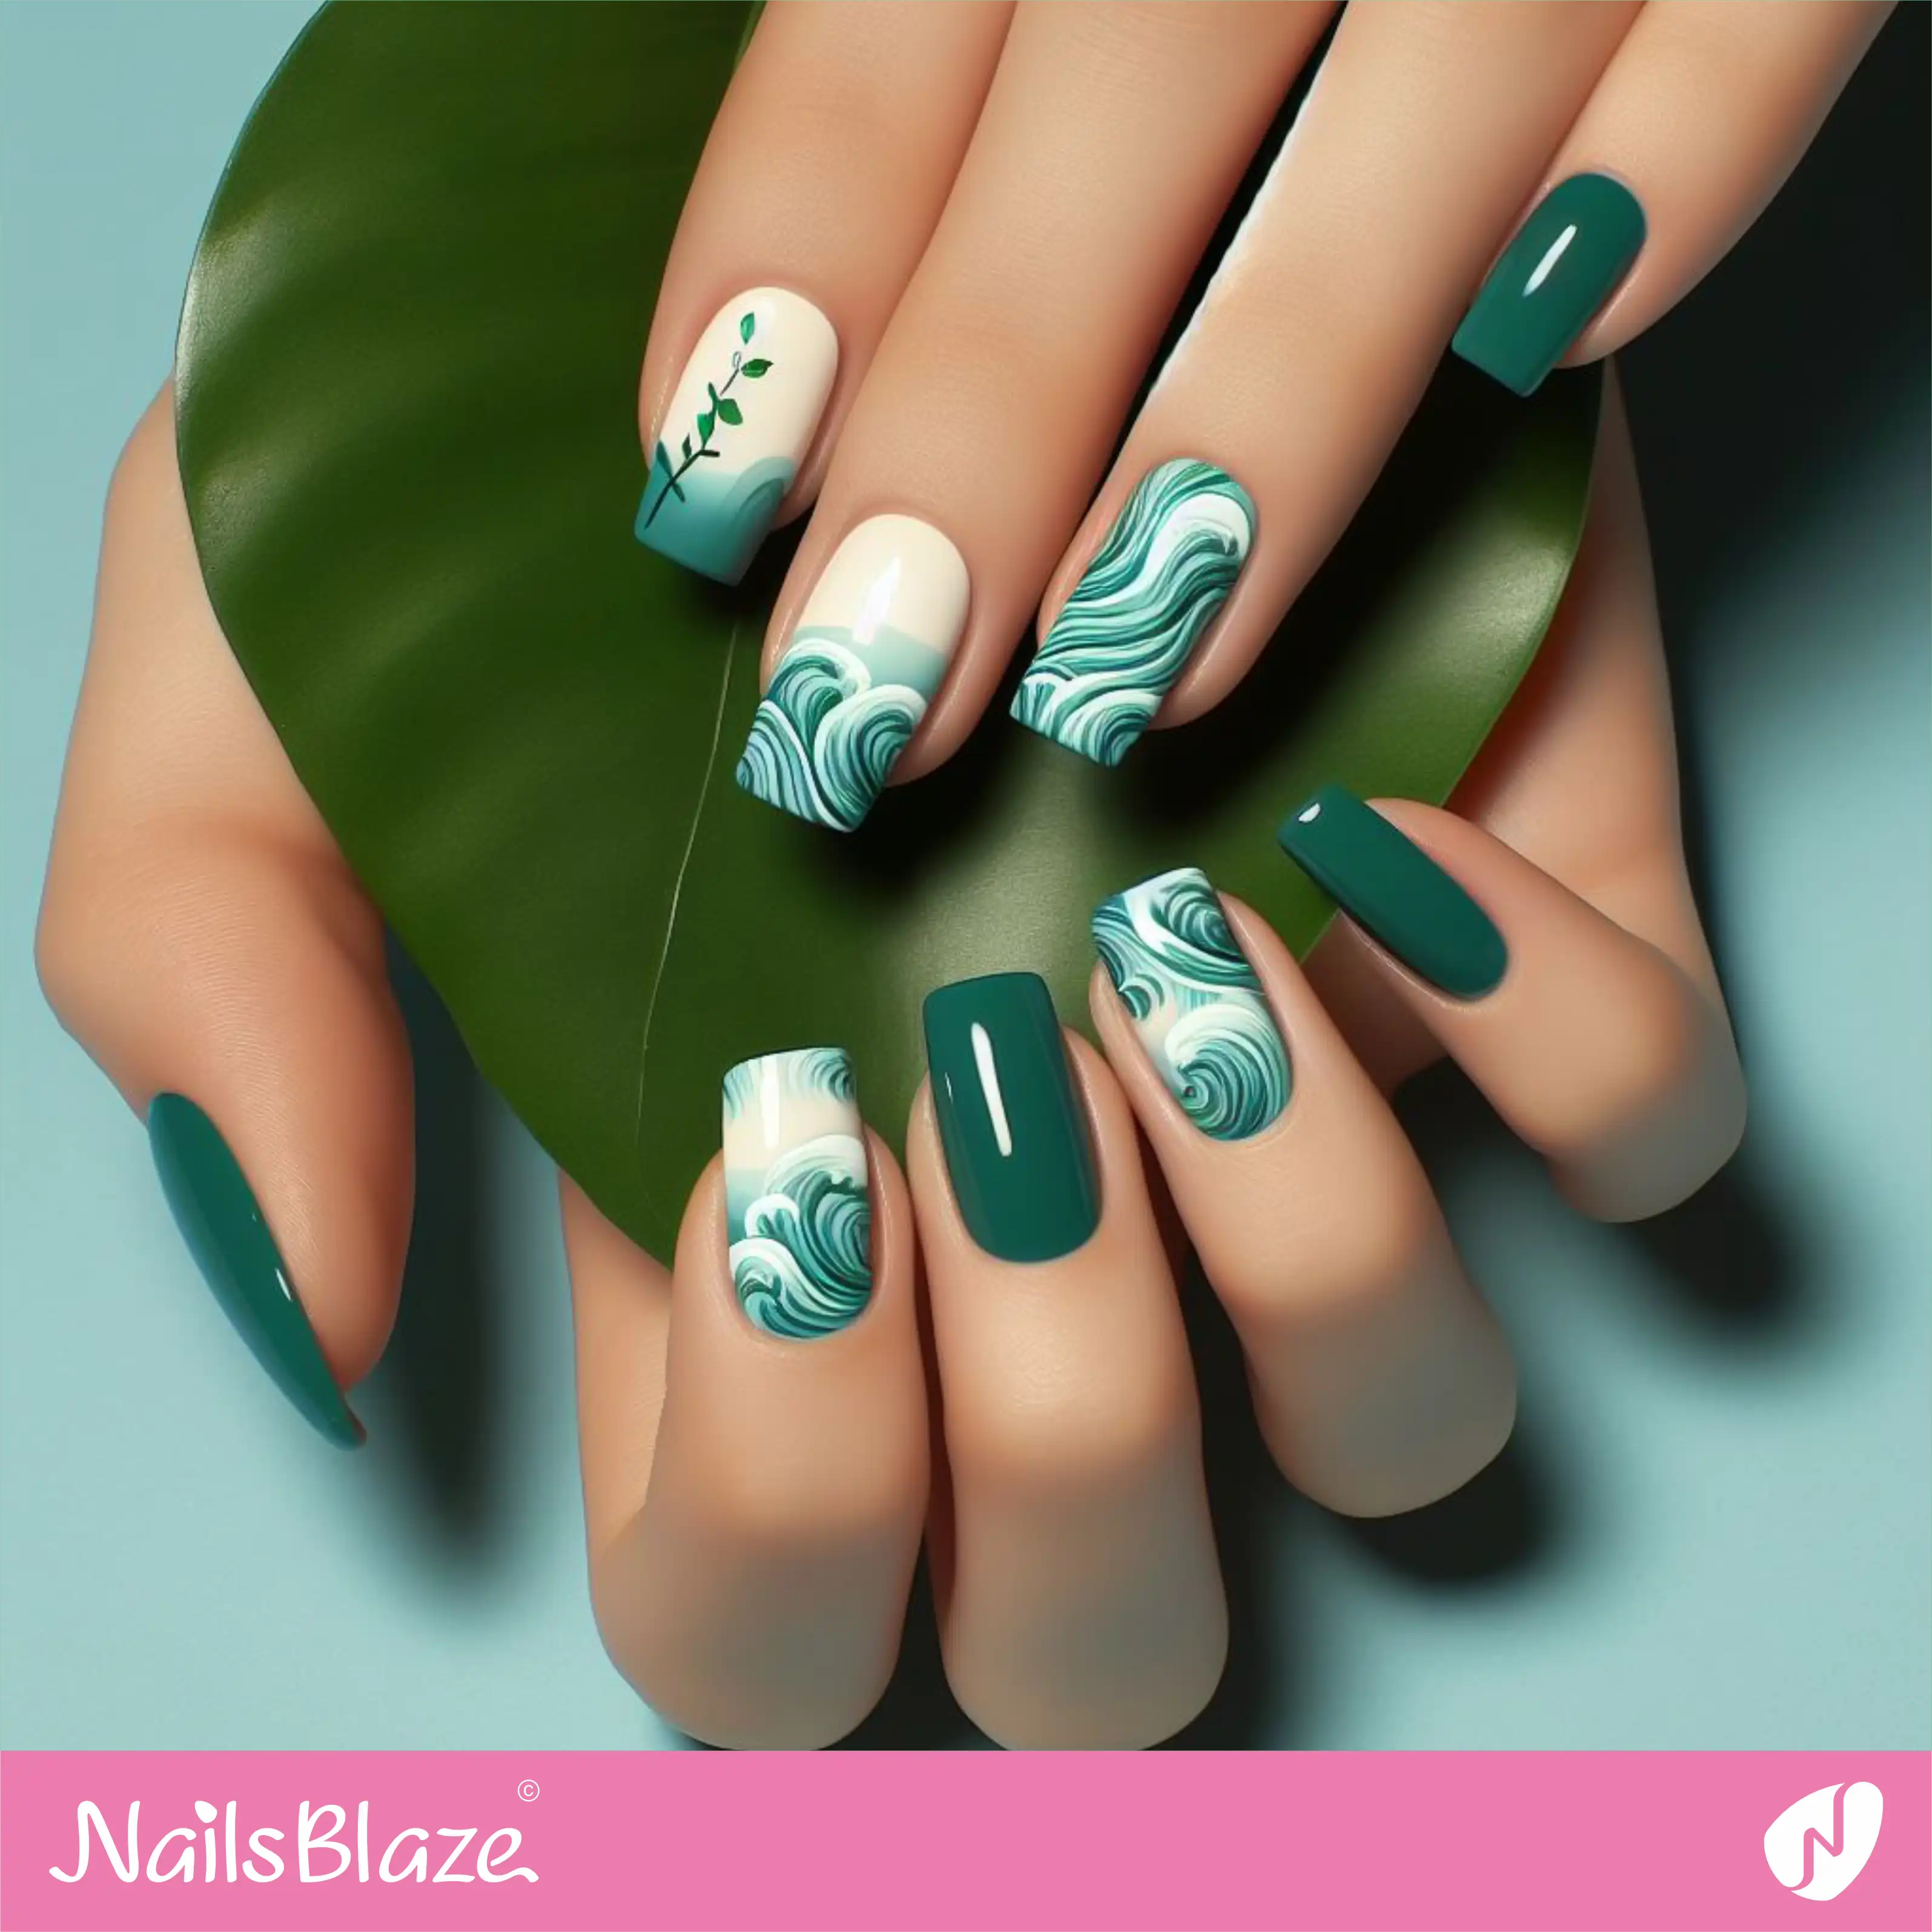 Ocean Nail Art with Green Swirls | Save the Ocean Nails - NB3286